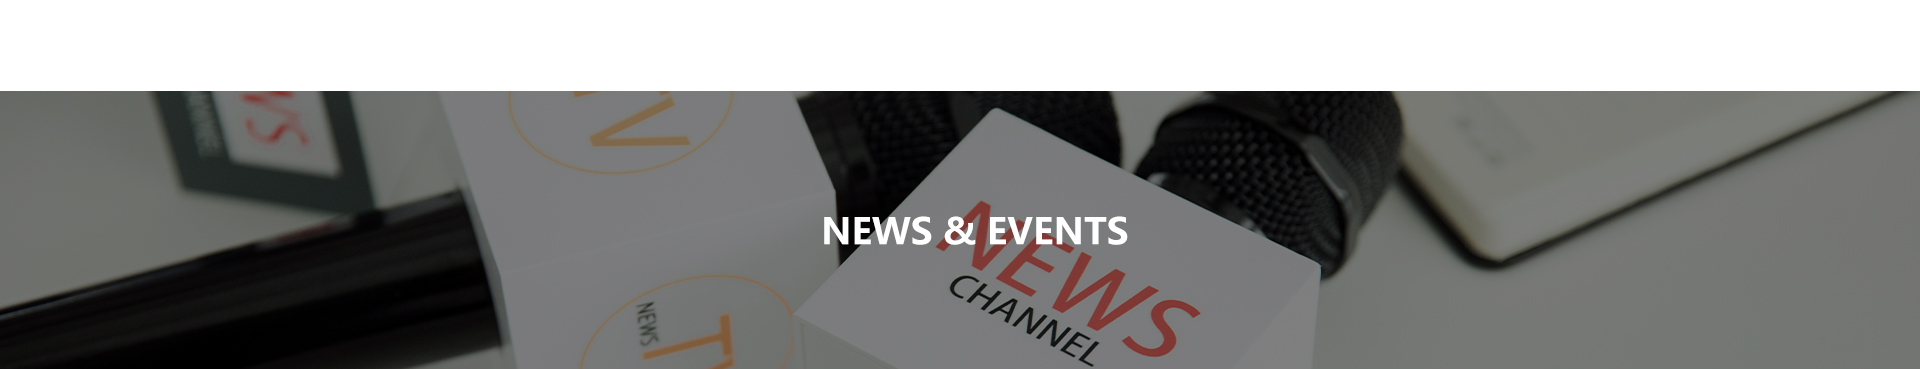 News& Events